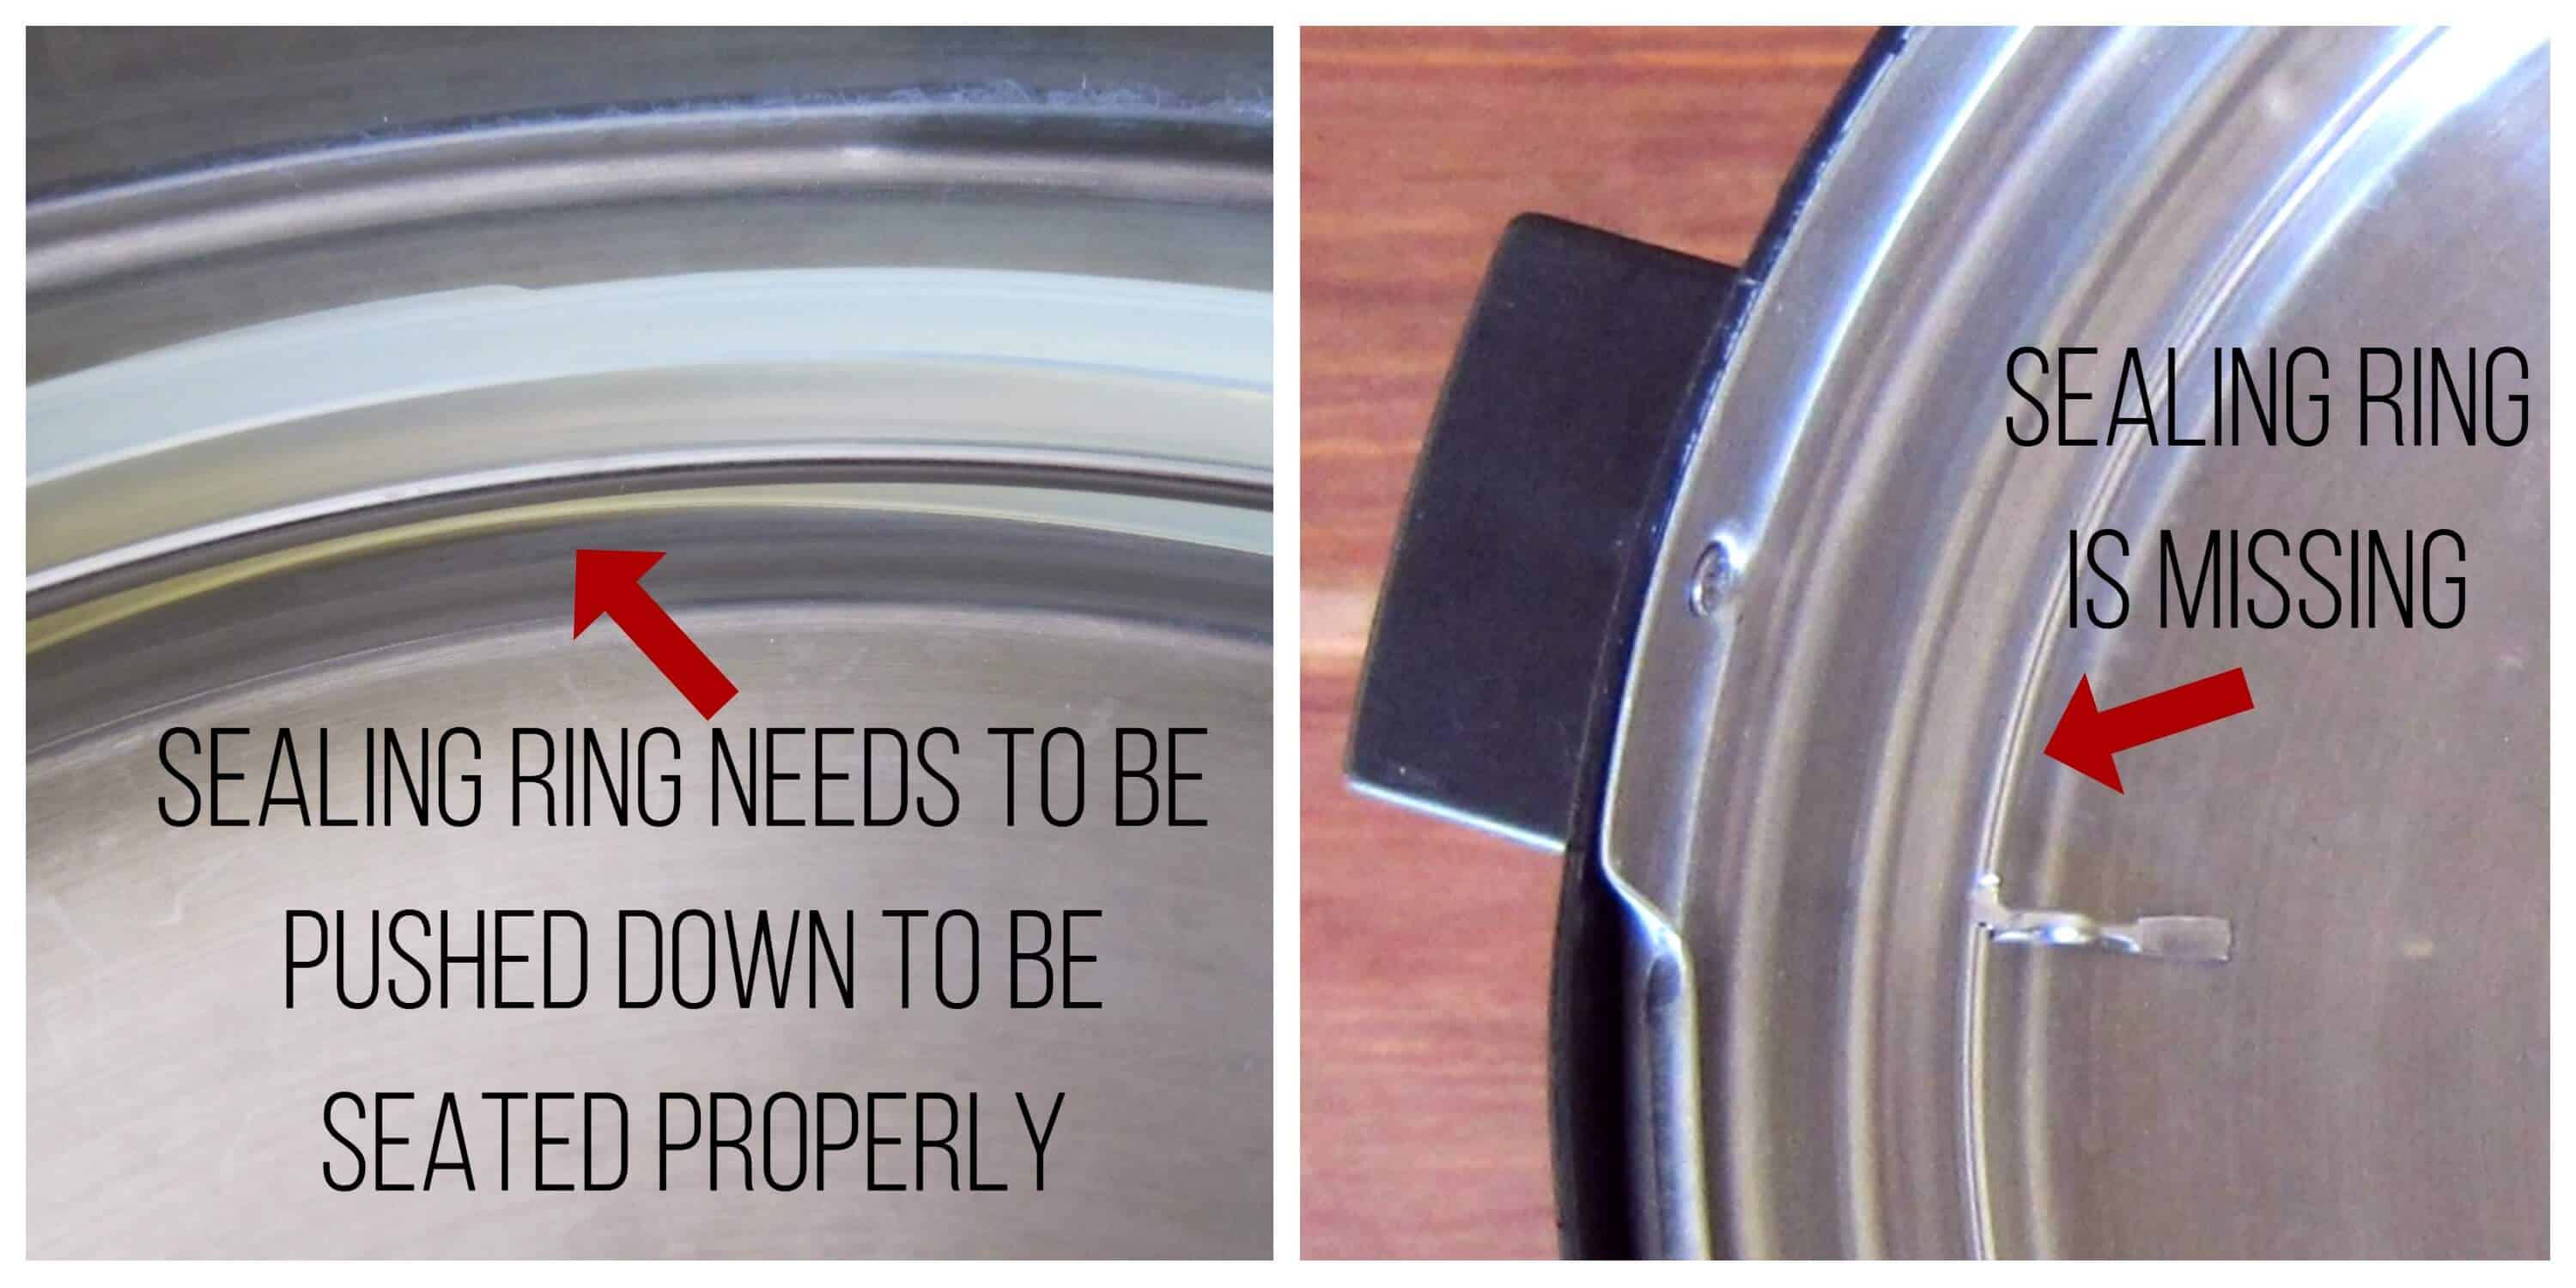 Instant Pot Burn Message - sealing ring problems collage - Sealing ring needs to be pushed down to be properly seated and sealing ring missing - Paint the Kitchen Red